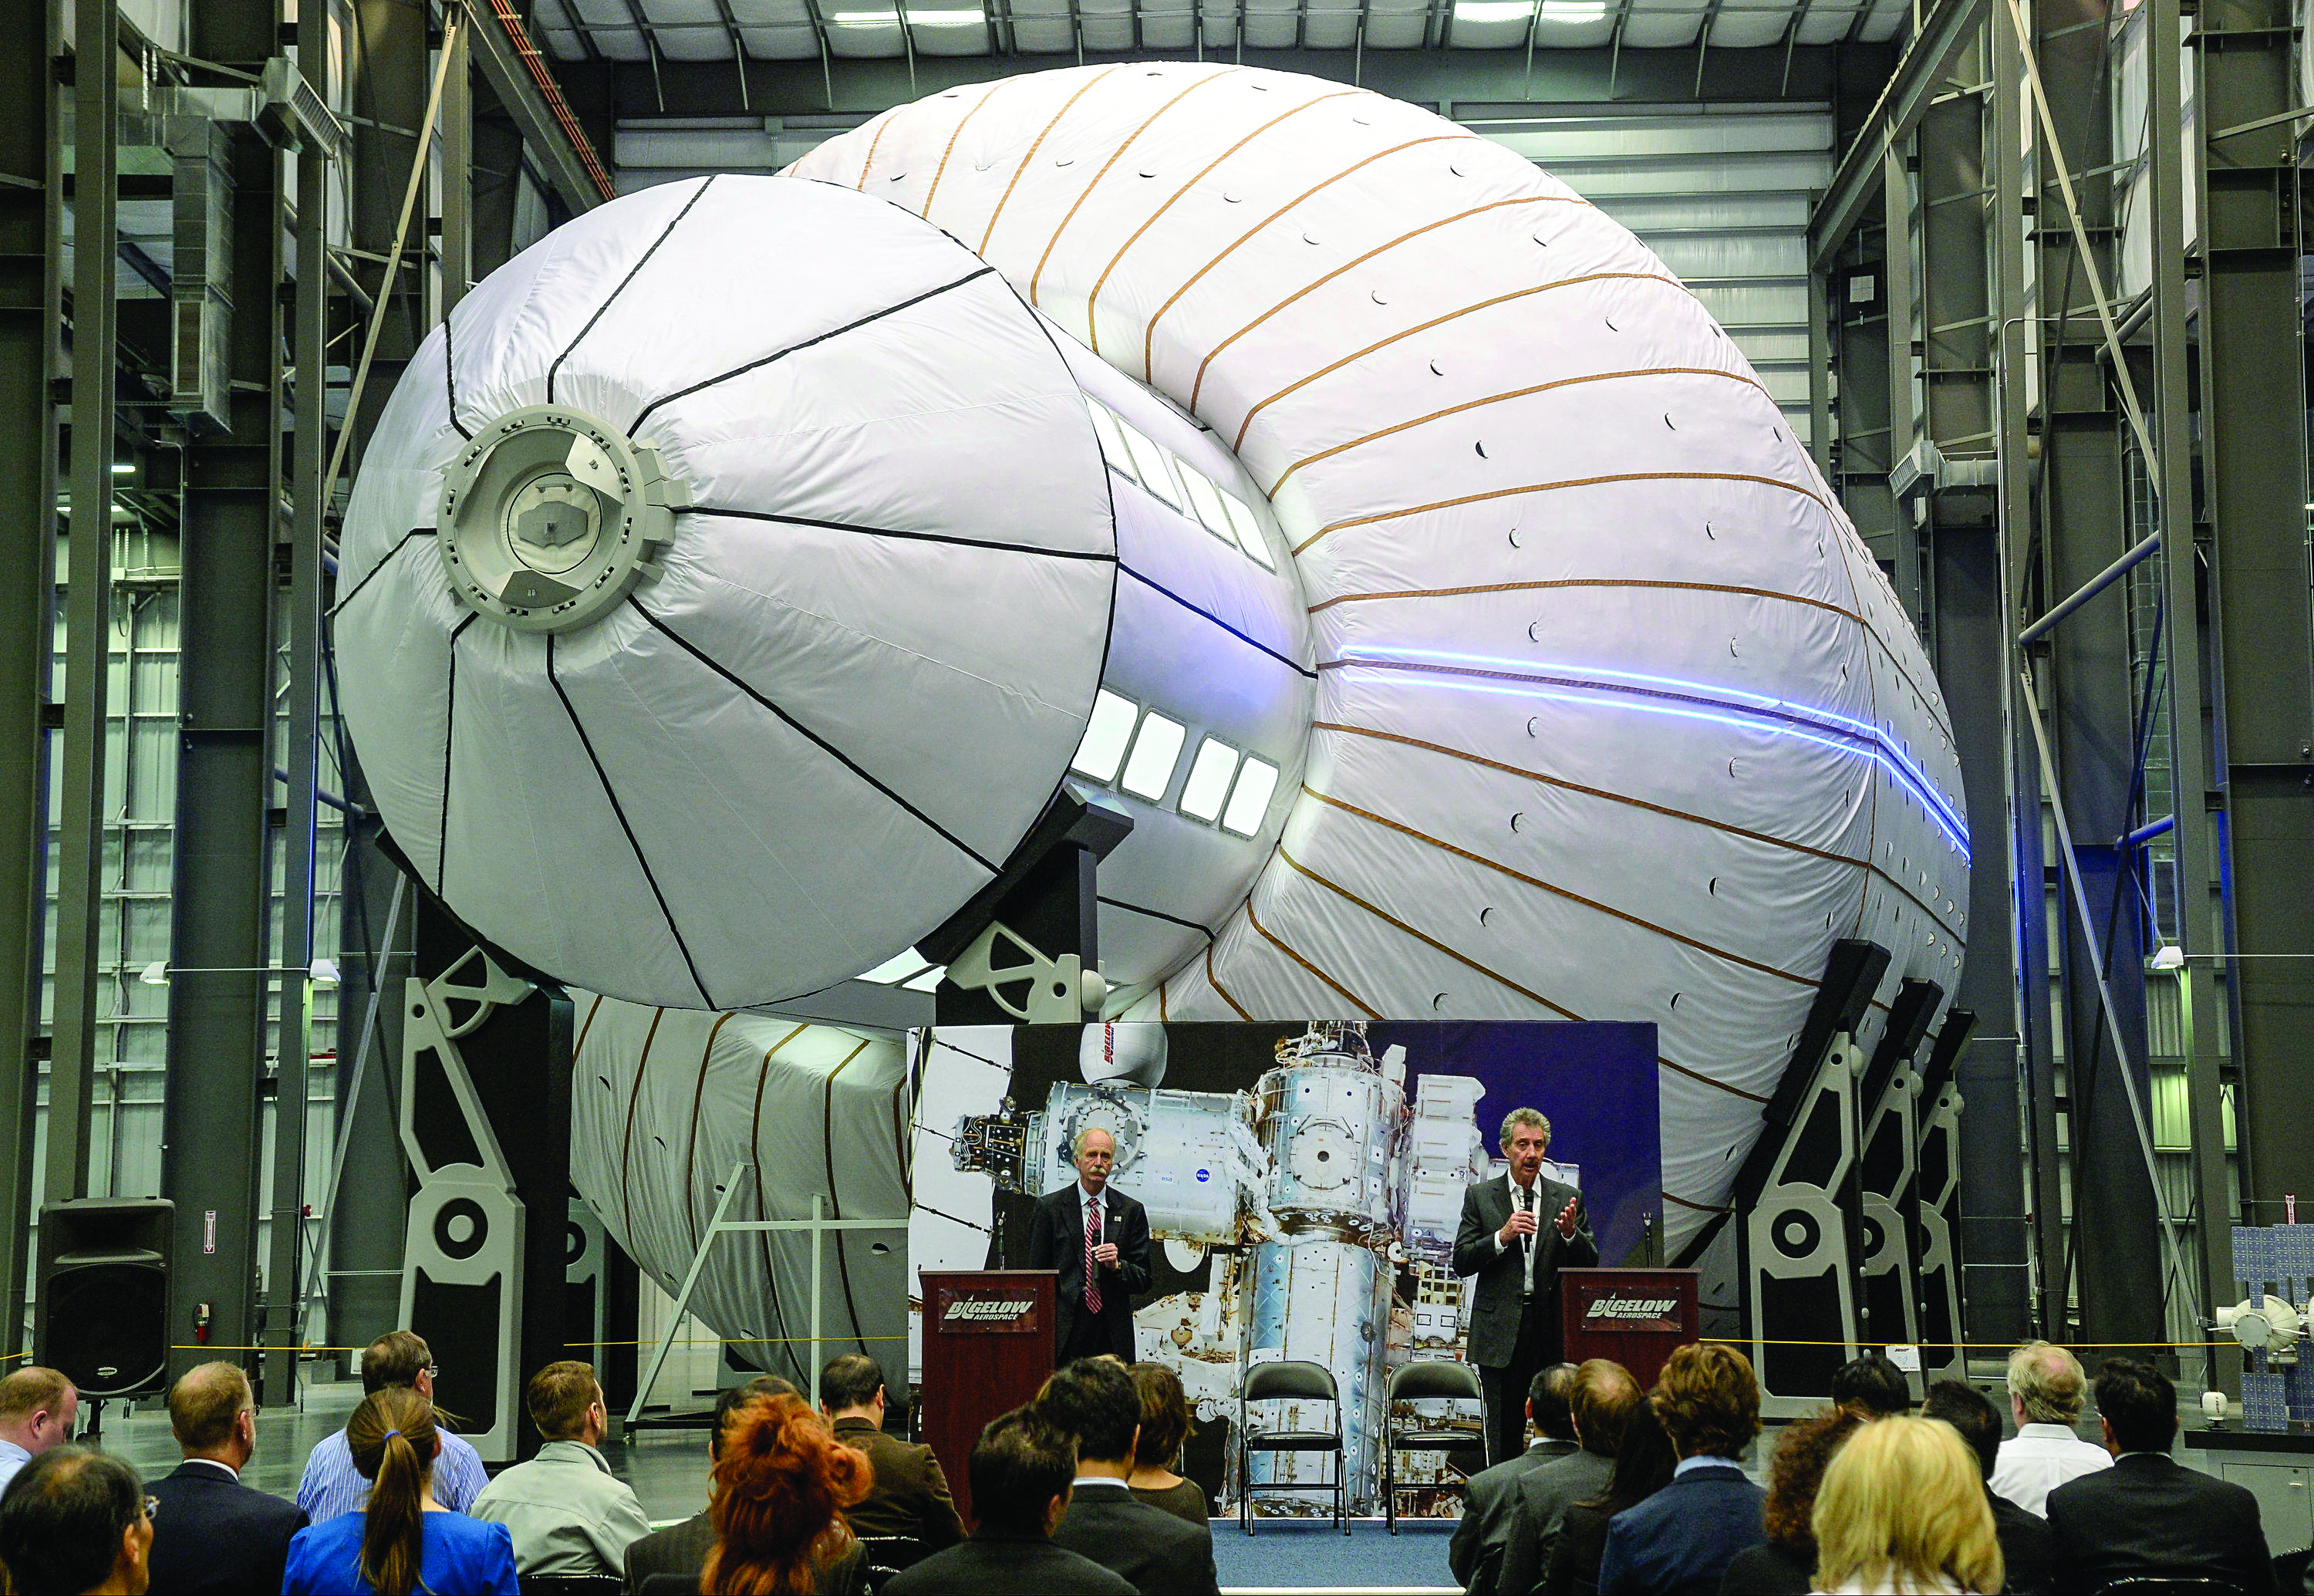 Can Billionaire Robert Bigelow Create A Life For Humans In Space?